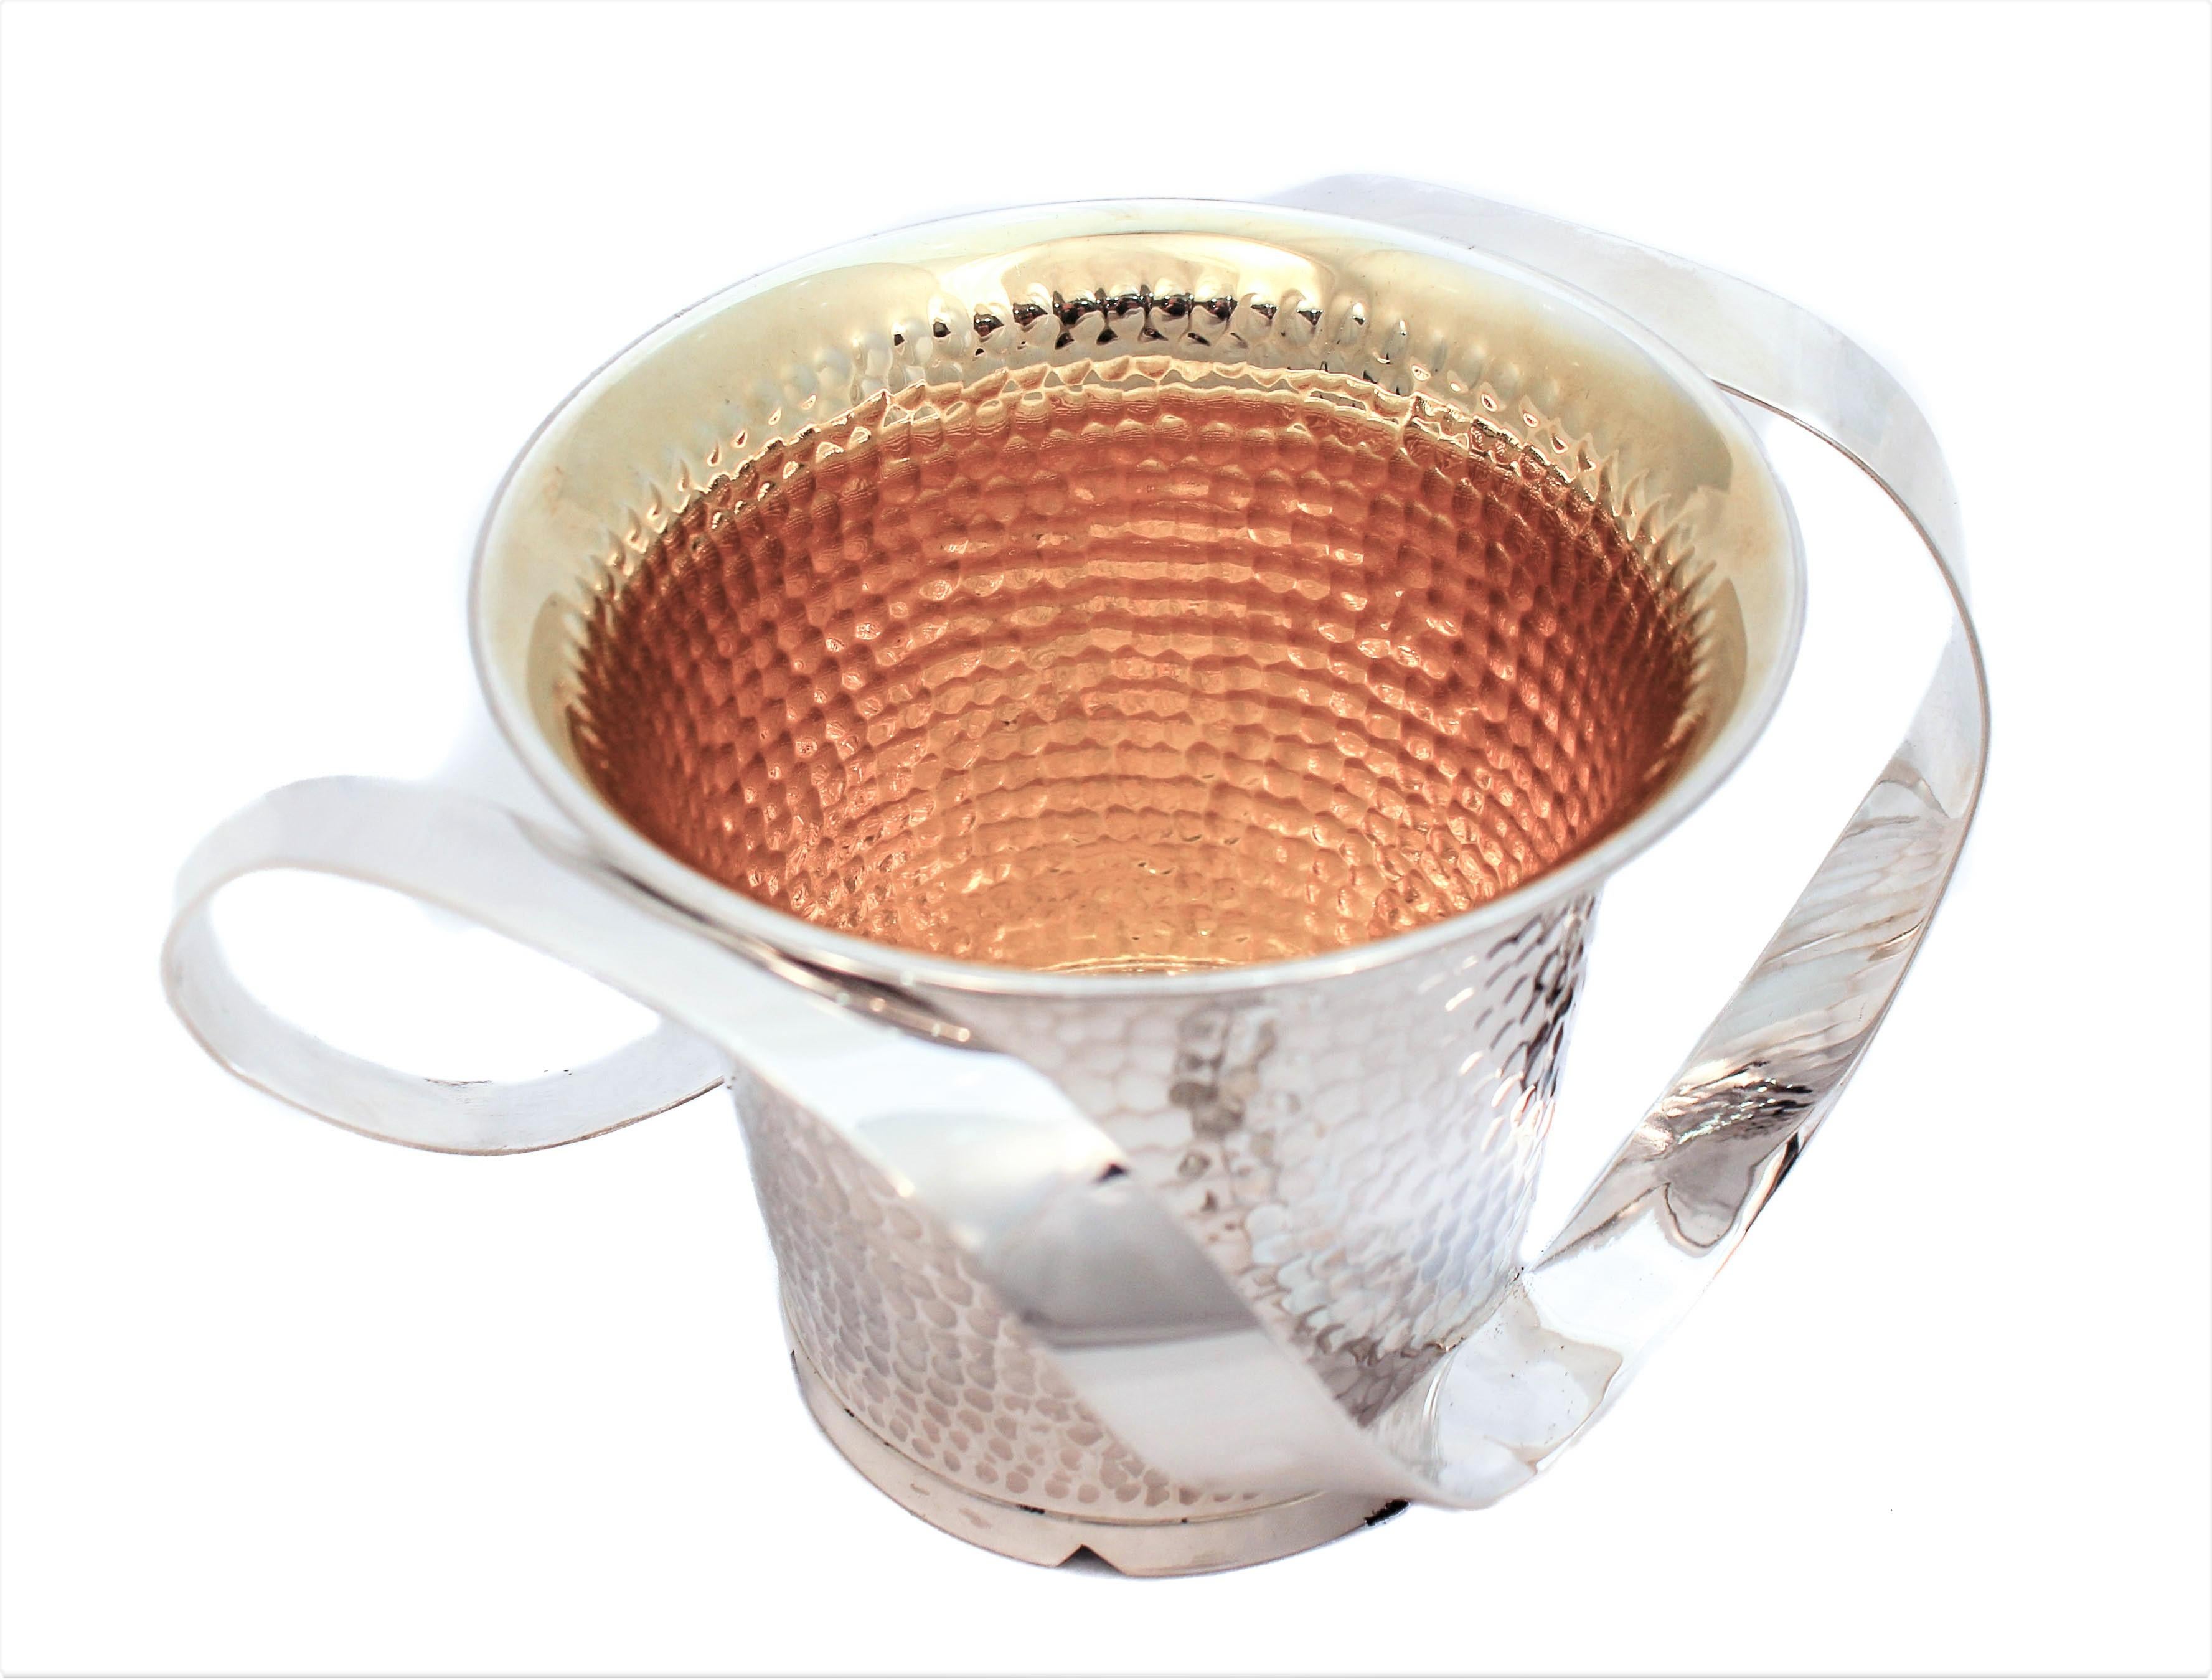 We are happy to offer you this sterling silver hammered n’tillat yadaiyim (washing cup)cup. It is hand-hammered with a modern handle. The base has six triangular cutouts that add to the modern, sleek look. Gold-washed on the inside to protect it